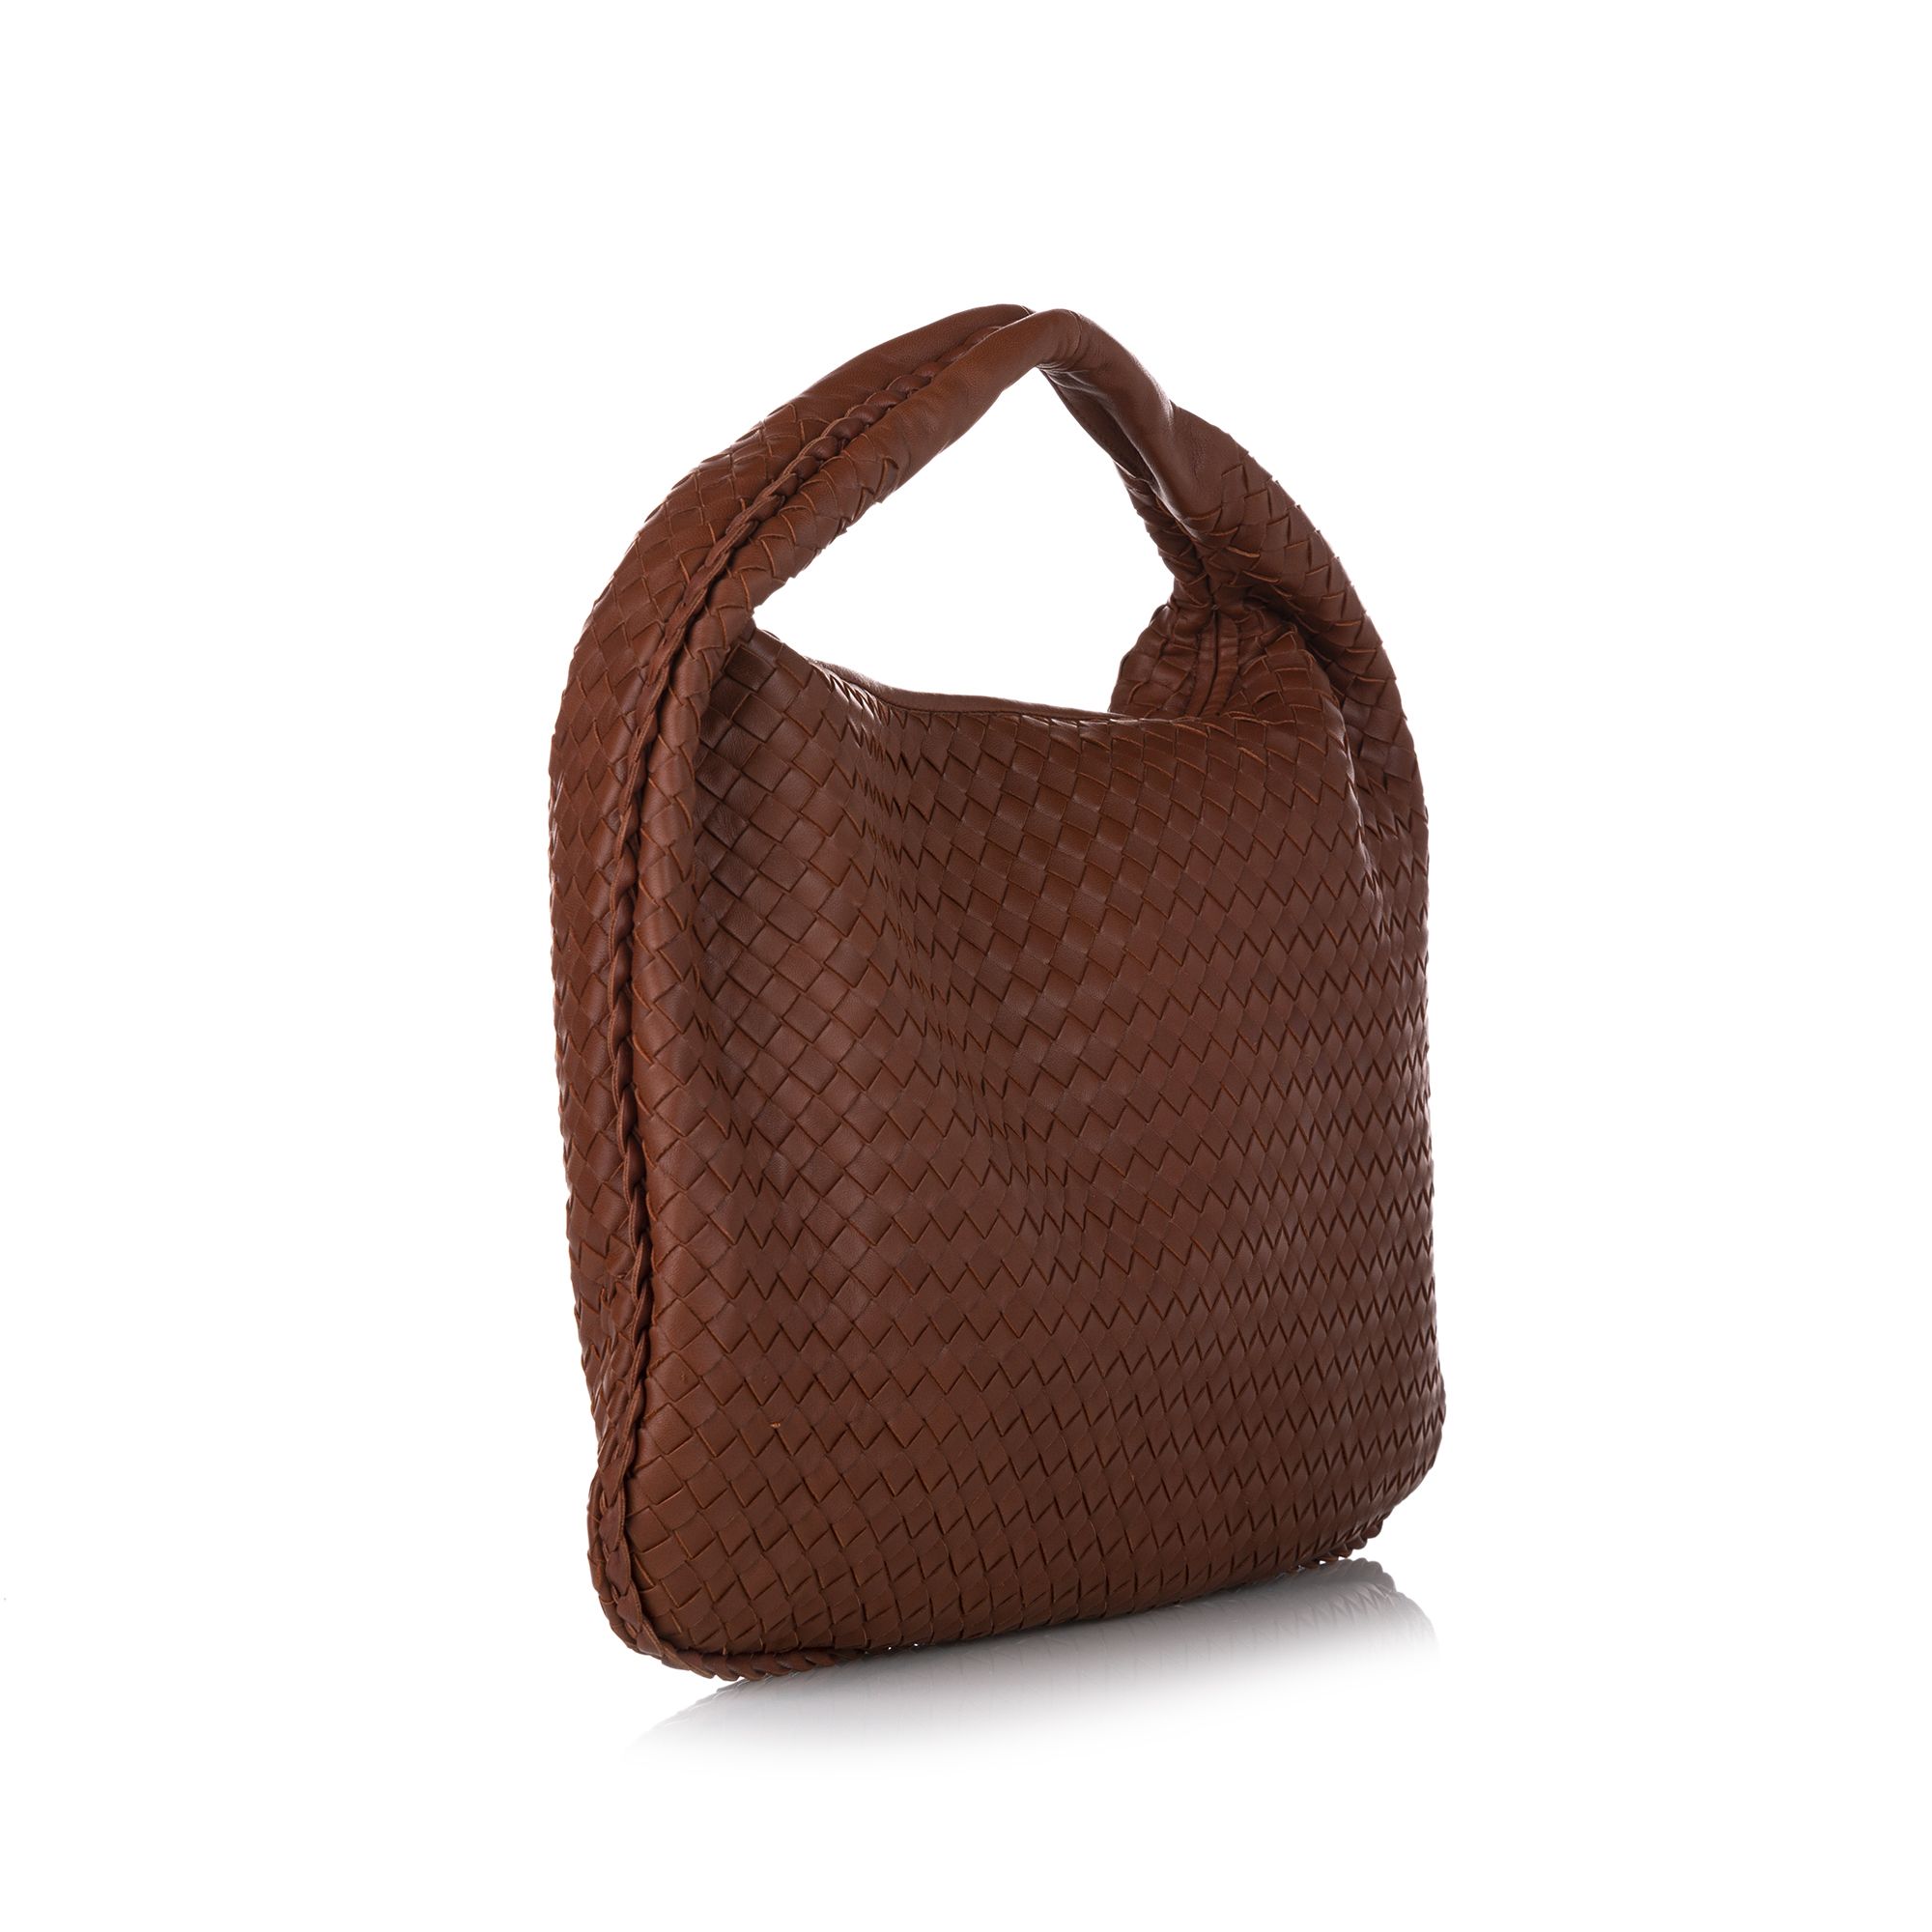 VINTAGE. RRP AS NEW. The Intrecciato hobo bag features a woven leather body, a flat strap, a top zip closure, and an interior zip pocket.

Dimensions:
Length 30cm
Width 46cm
Depth 3cm
Hand Drop 8cm

Original Accessories: Dust Bag, Dust Bag, Authenticity Card

Serial Number: 115654 V0013 6308 EPEV 2008 5952 A
Color: Brown
Material: Leather x Calf
Country of Origin: Italy
Boutique Reference: SSU154992K1342


Product Rating: GoodCondition

Certificate of Authenticity is available upon request with no extra fee required. Please contact our customer service team.